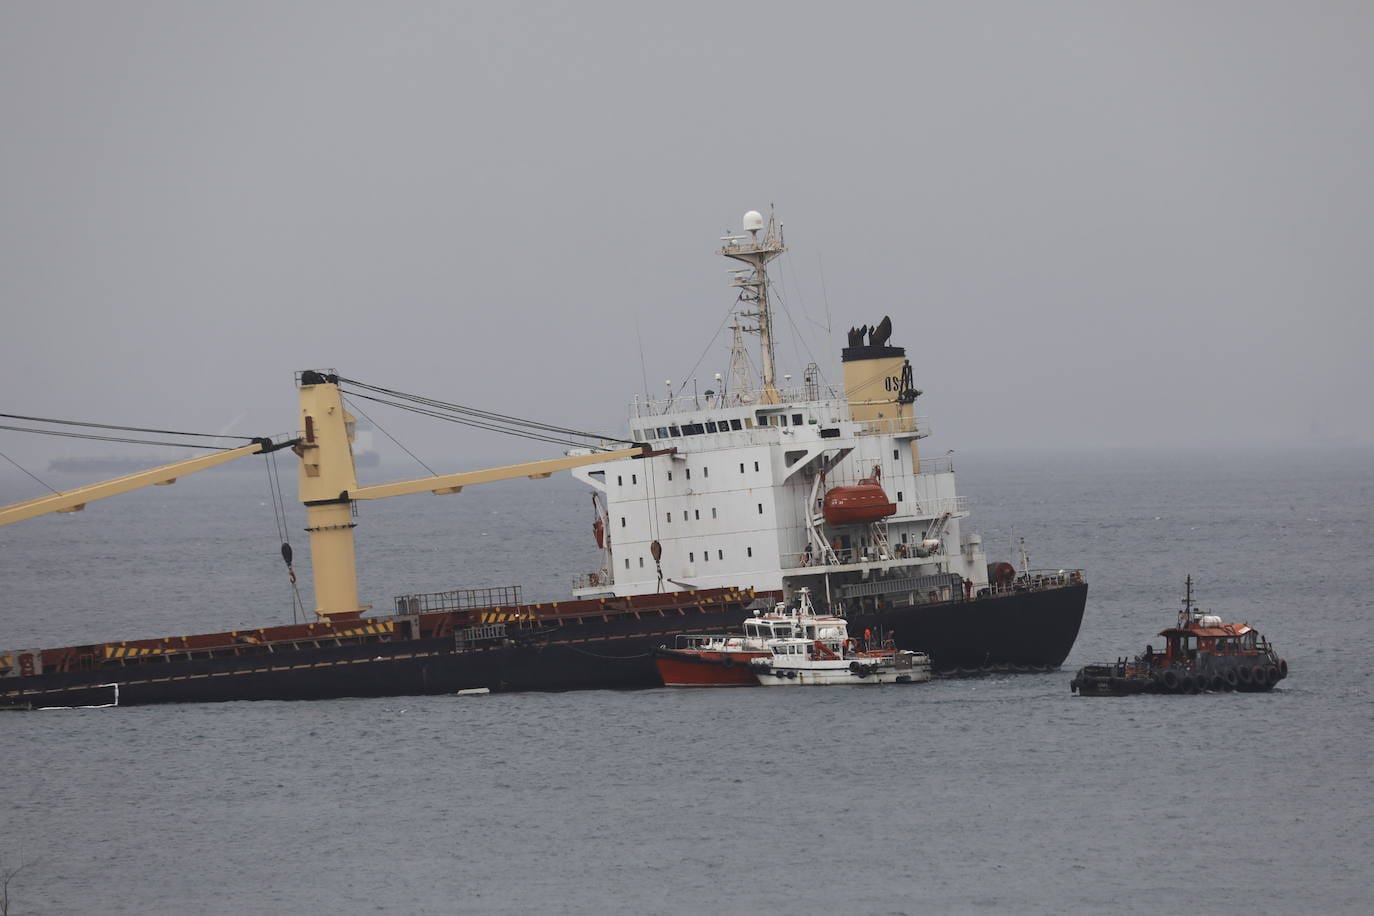 Fuel due to be pumped from the stricken bulk carrier off Gibraltar in a delicate two-day operation